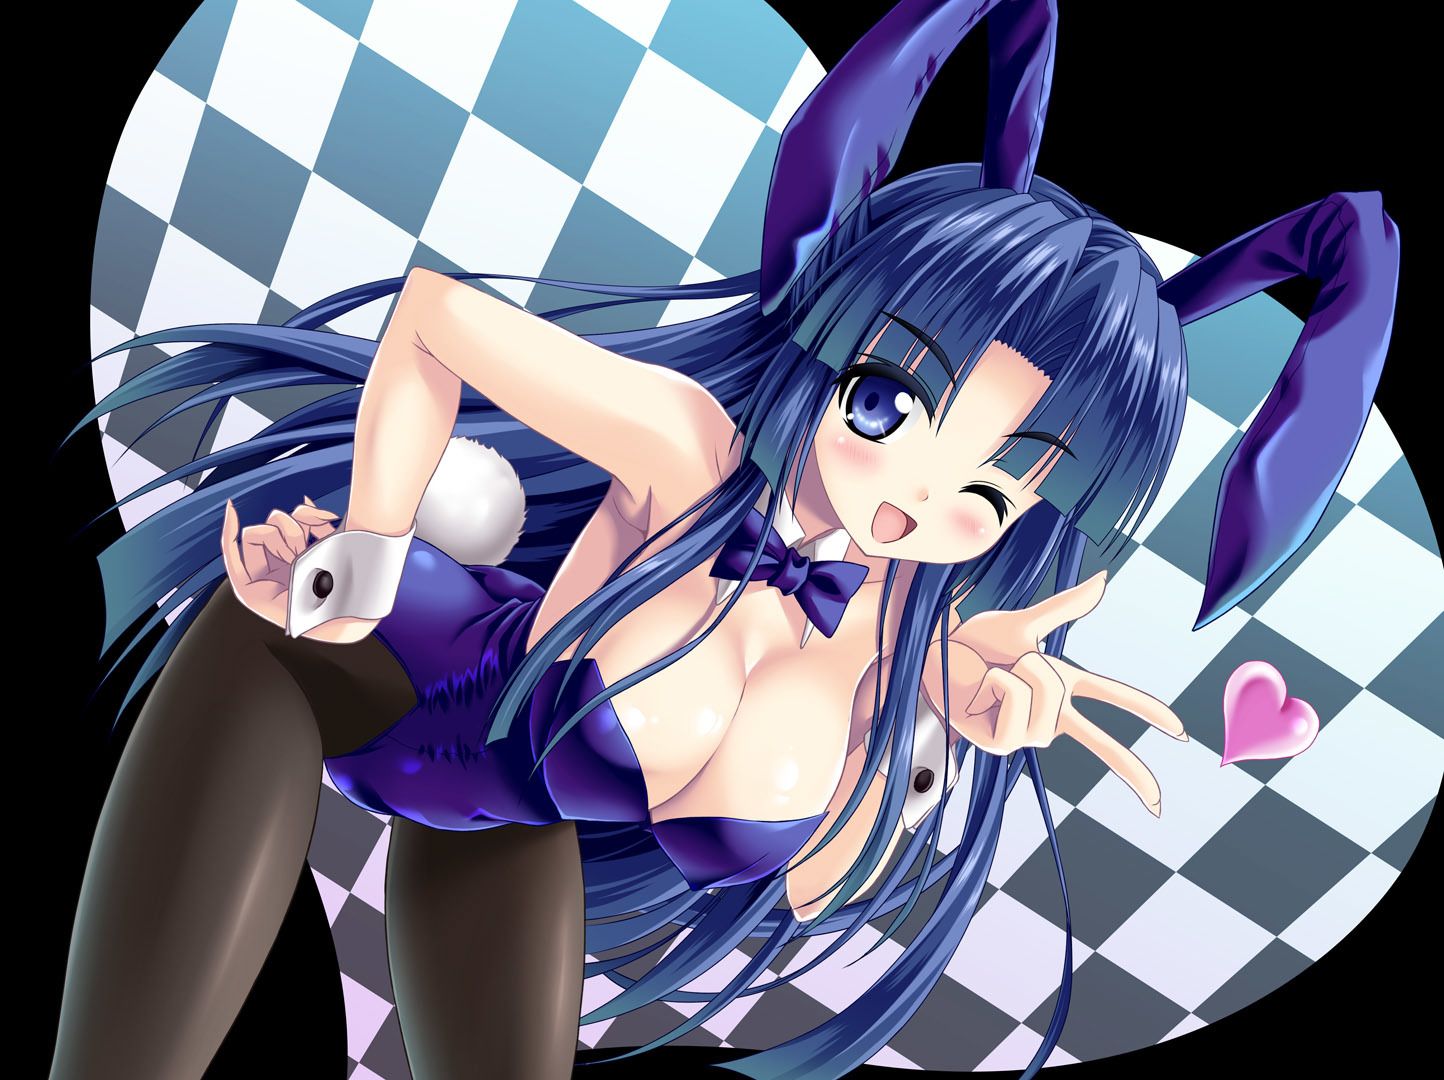 I collected erotic images of bunny girls 17